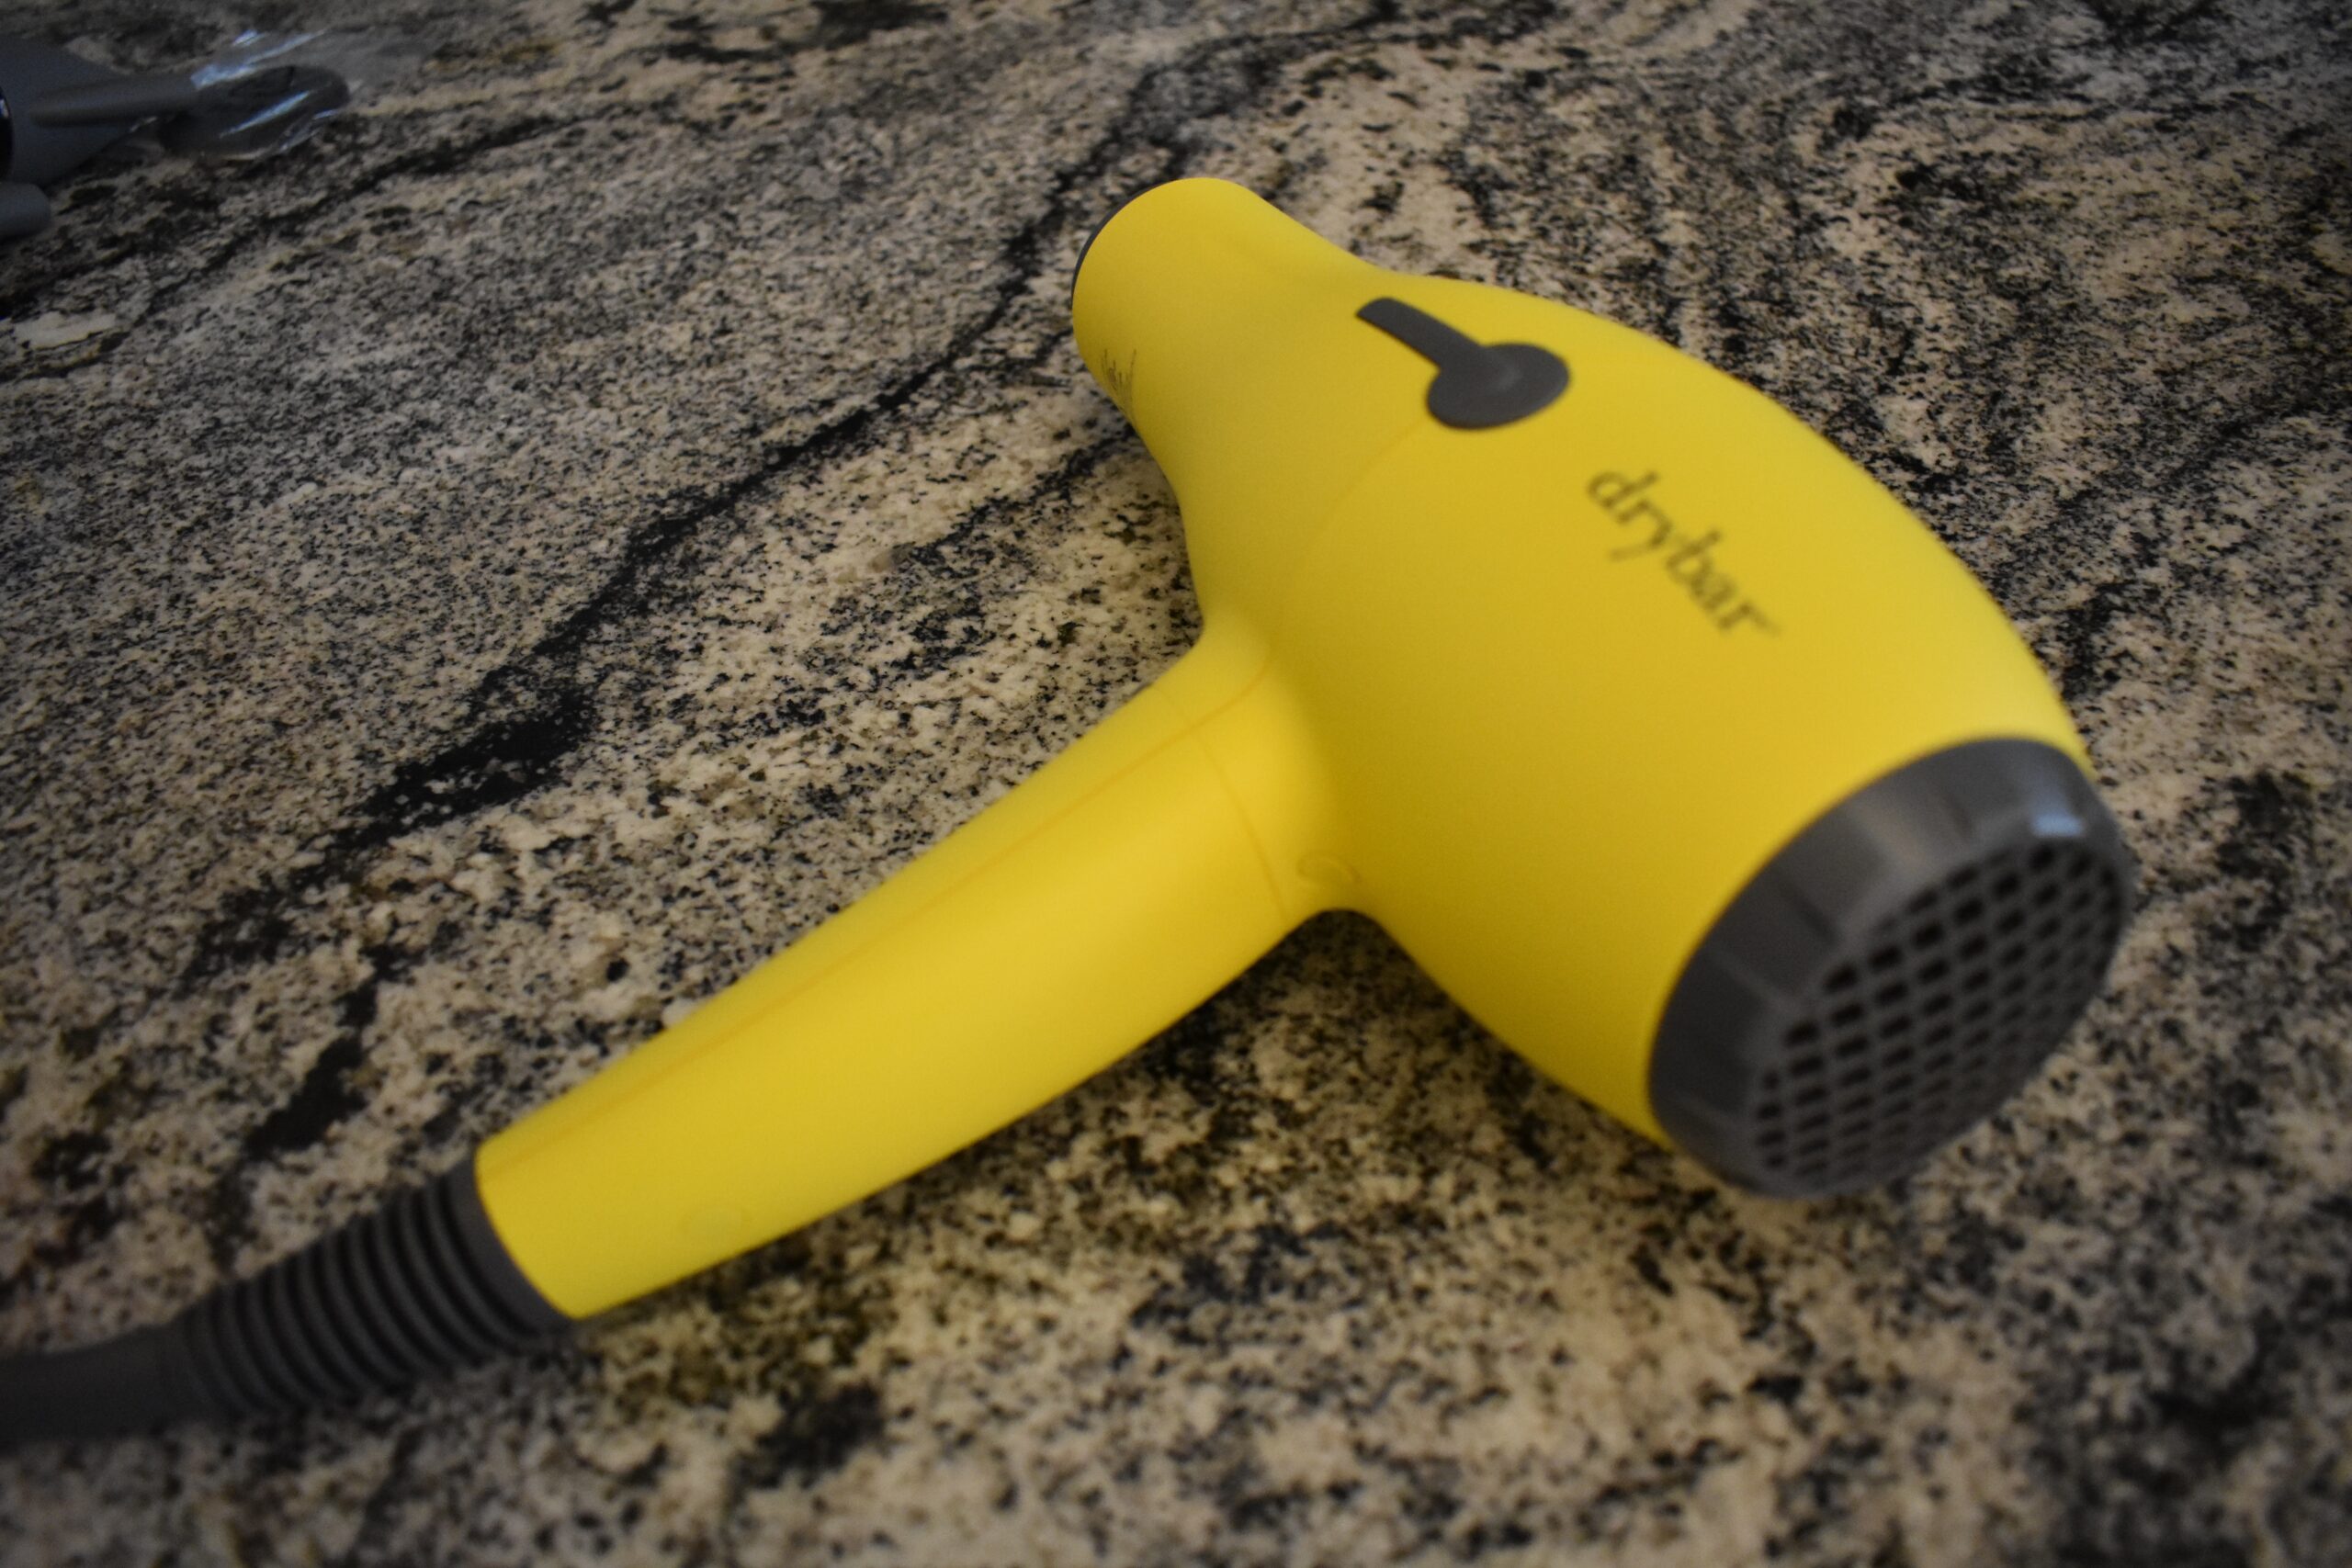 Side angle shot of the Drybar Buttercup hair dryer